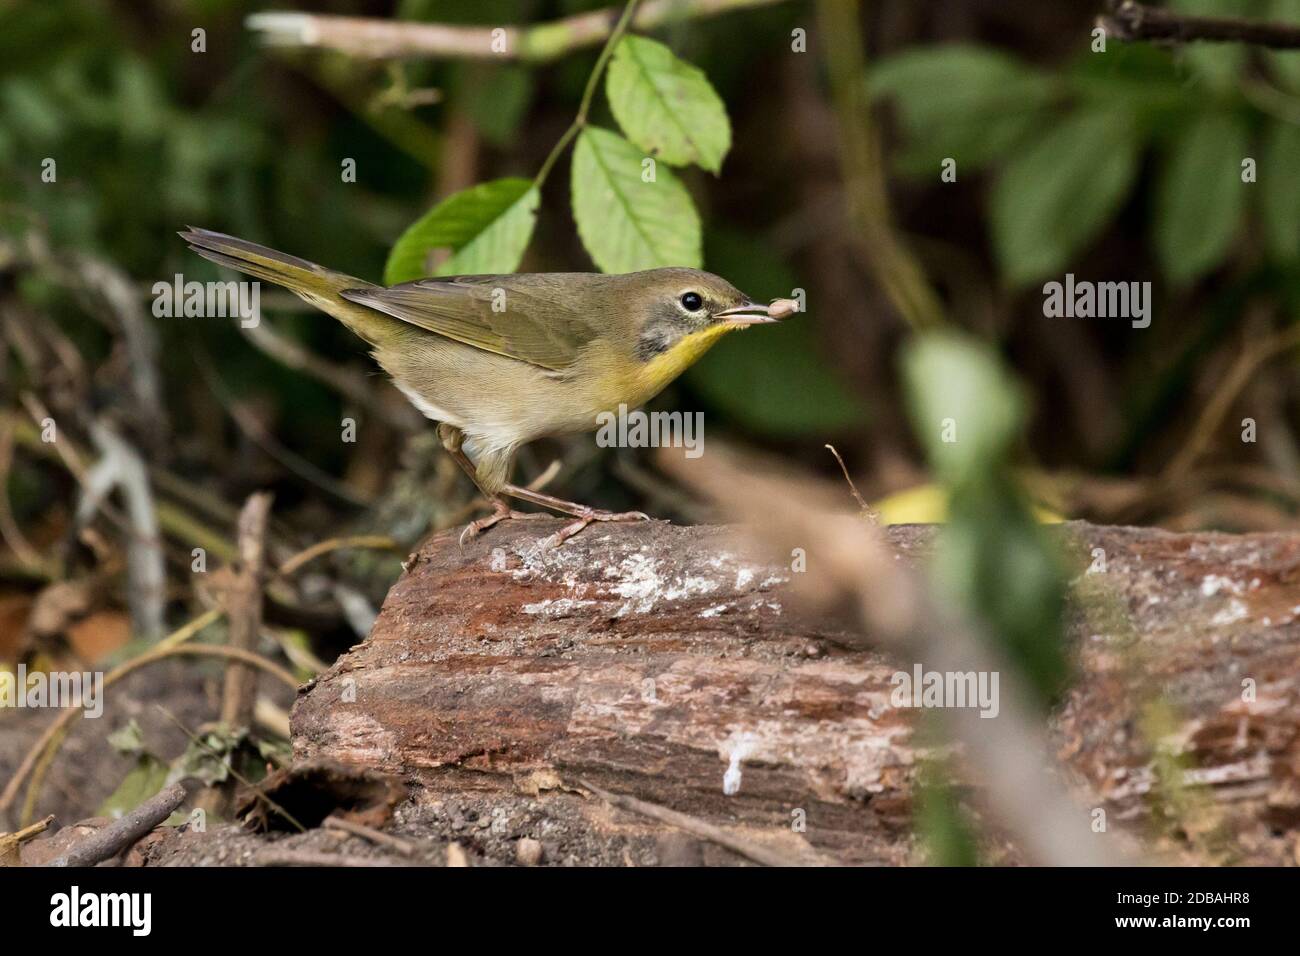 Common Yellowthroat (Geothlypis trichas) foraging on a log, Long Island, New York Stock Photo